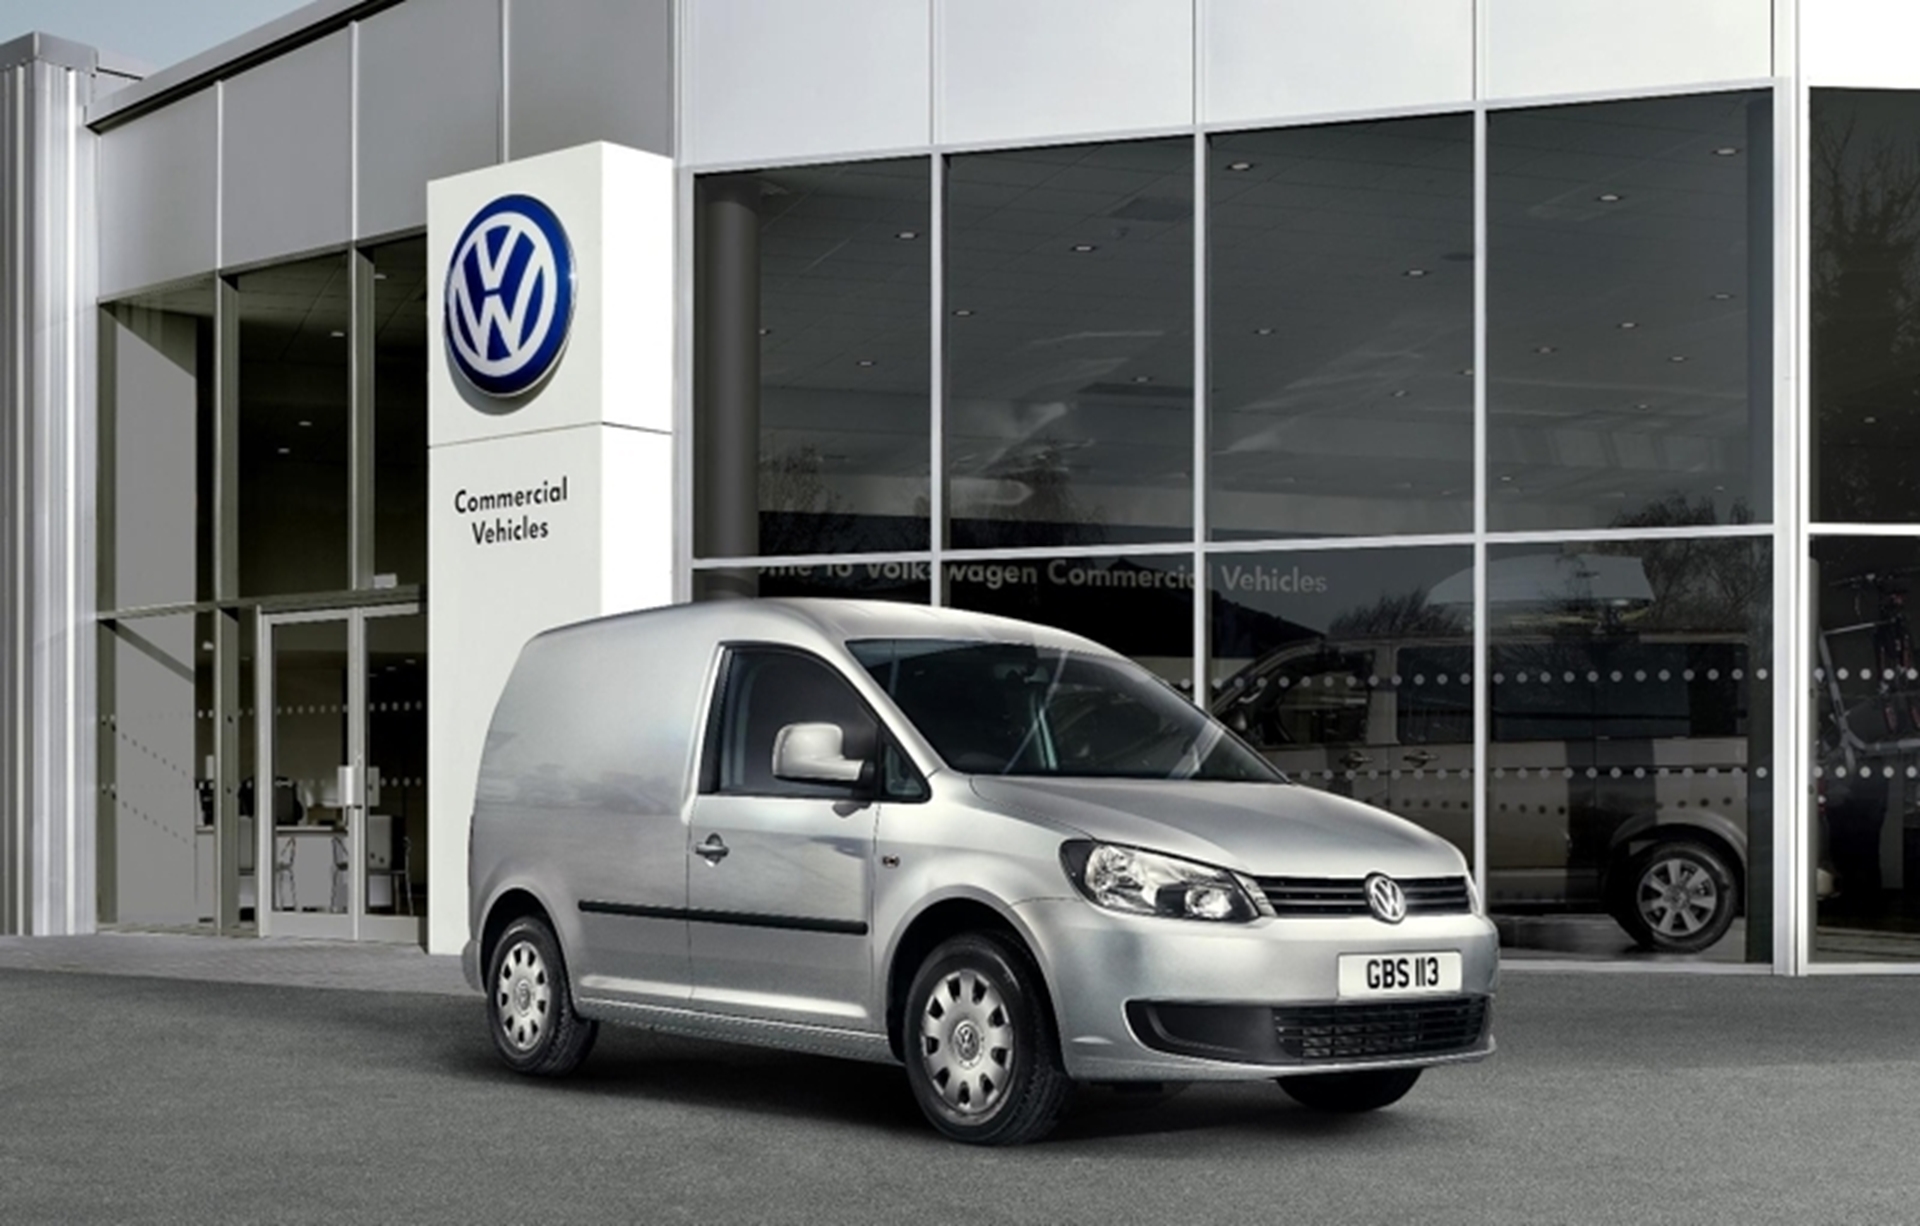 VOLKSWAGEN SPECIAL FINANCE OFFERS FOR THE CADDY MATCH SPECIAL EDITION